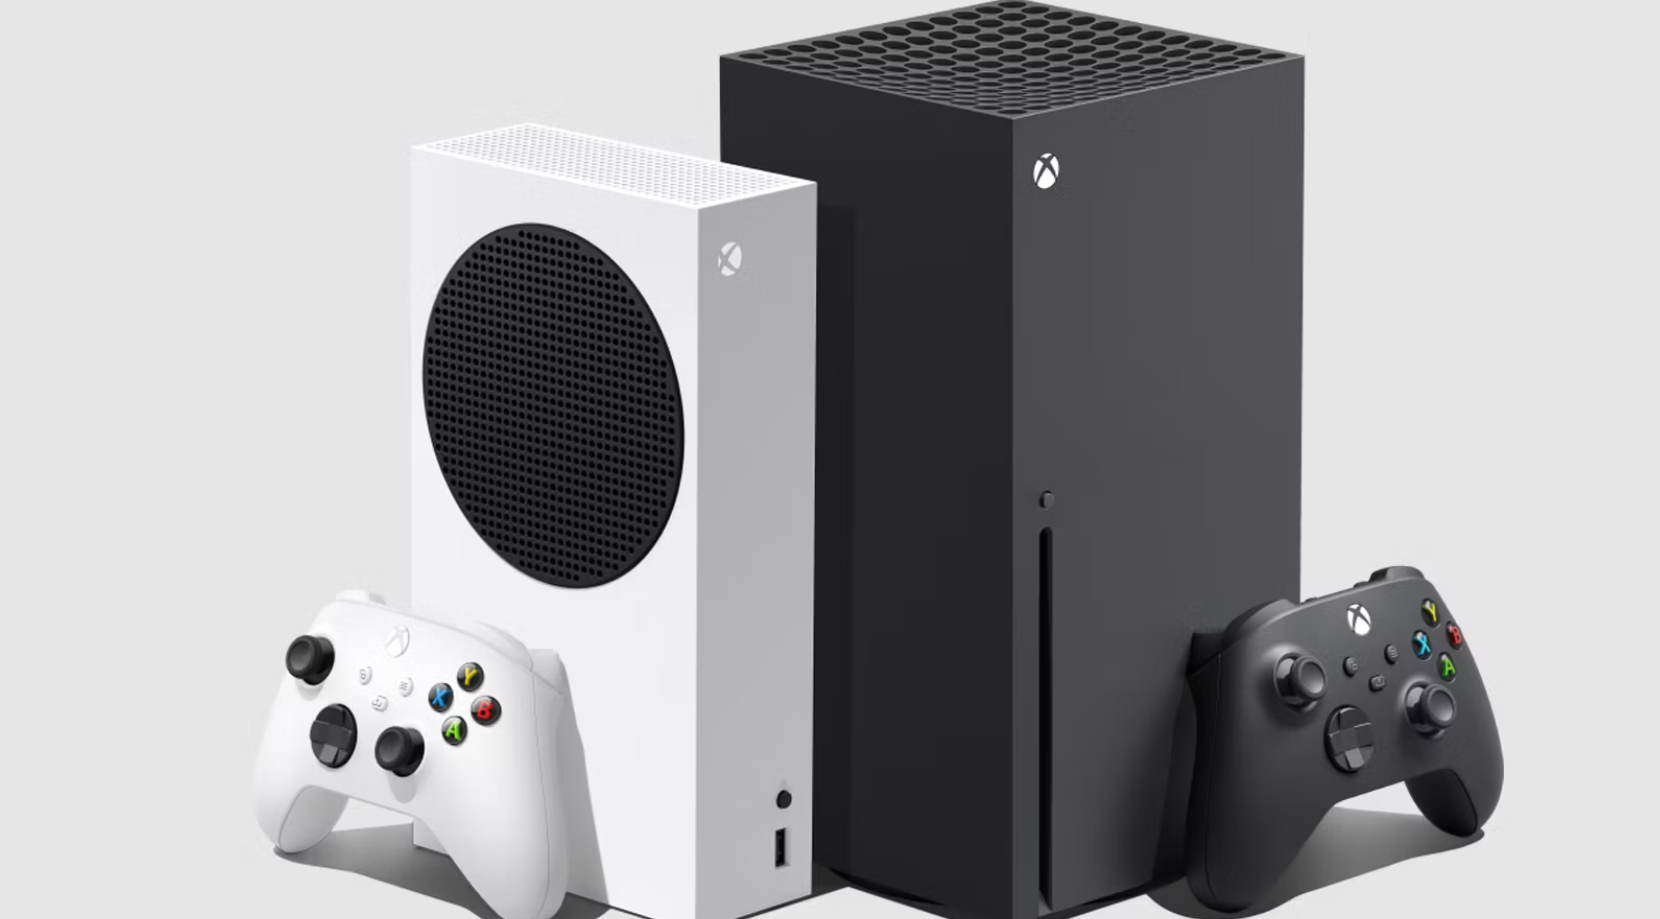 Digital Edition Xbox Series X features 1TB SSD for all your digital games